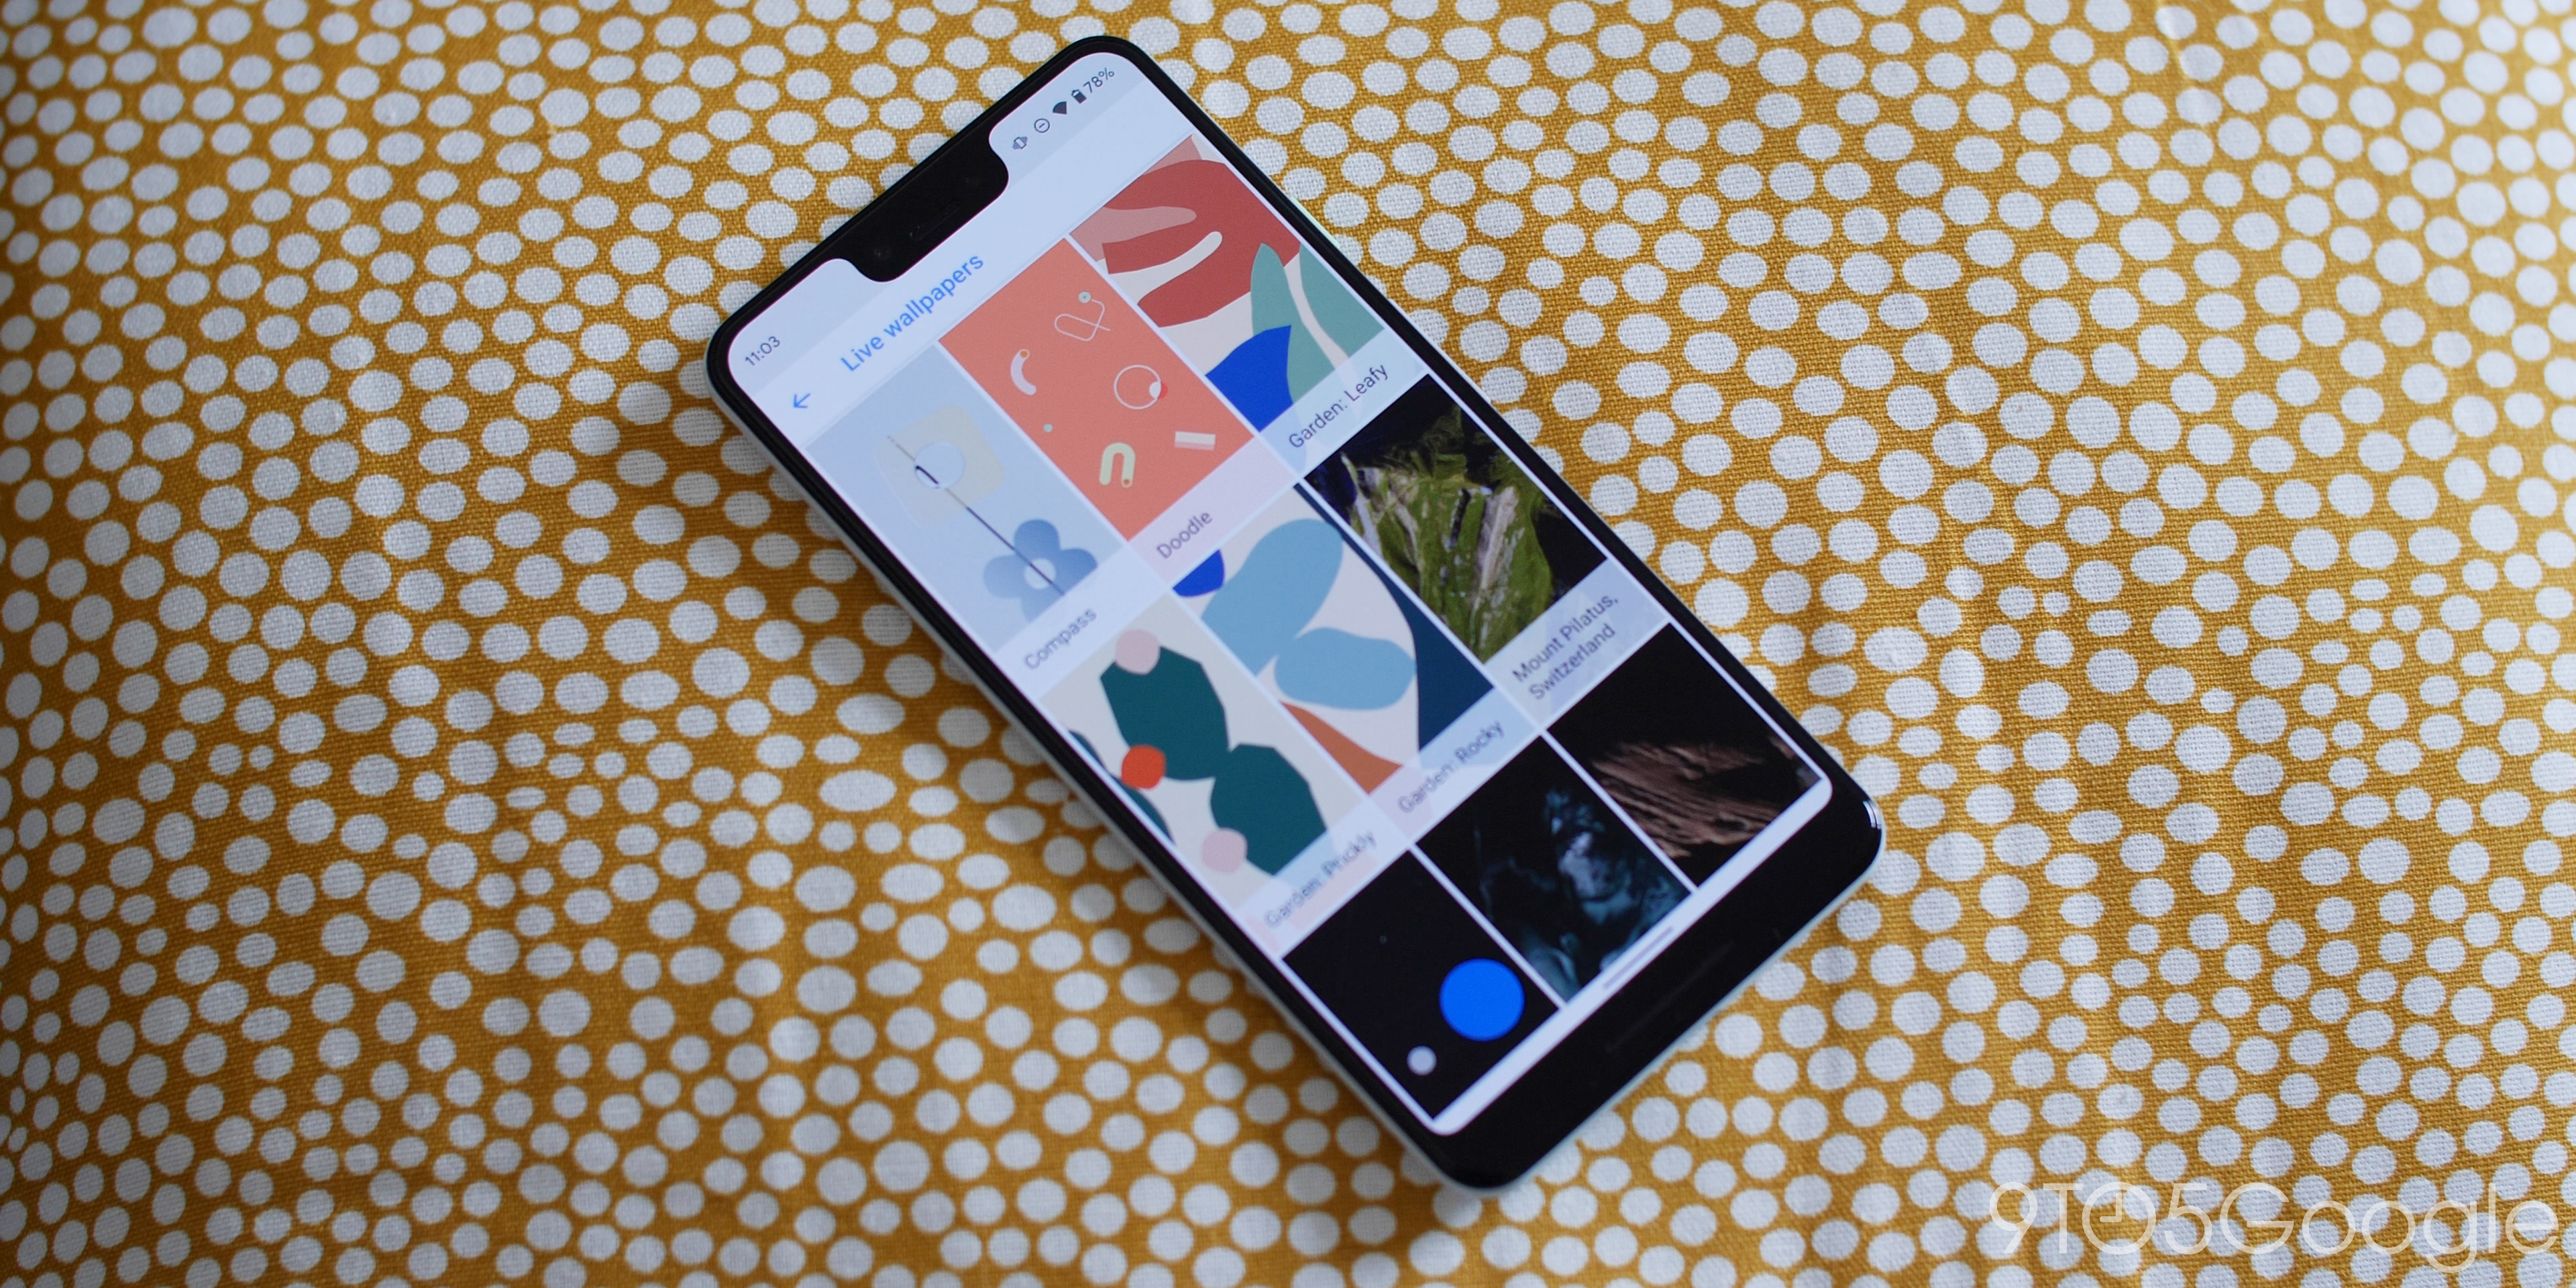 Hands-on with the new Google Pixel 4 live wallpapers [Video] - 9to5Google